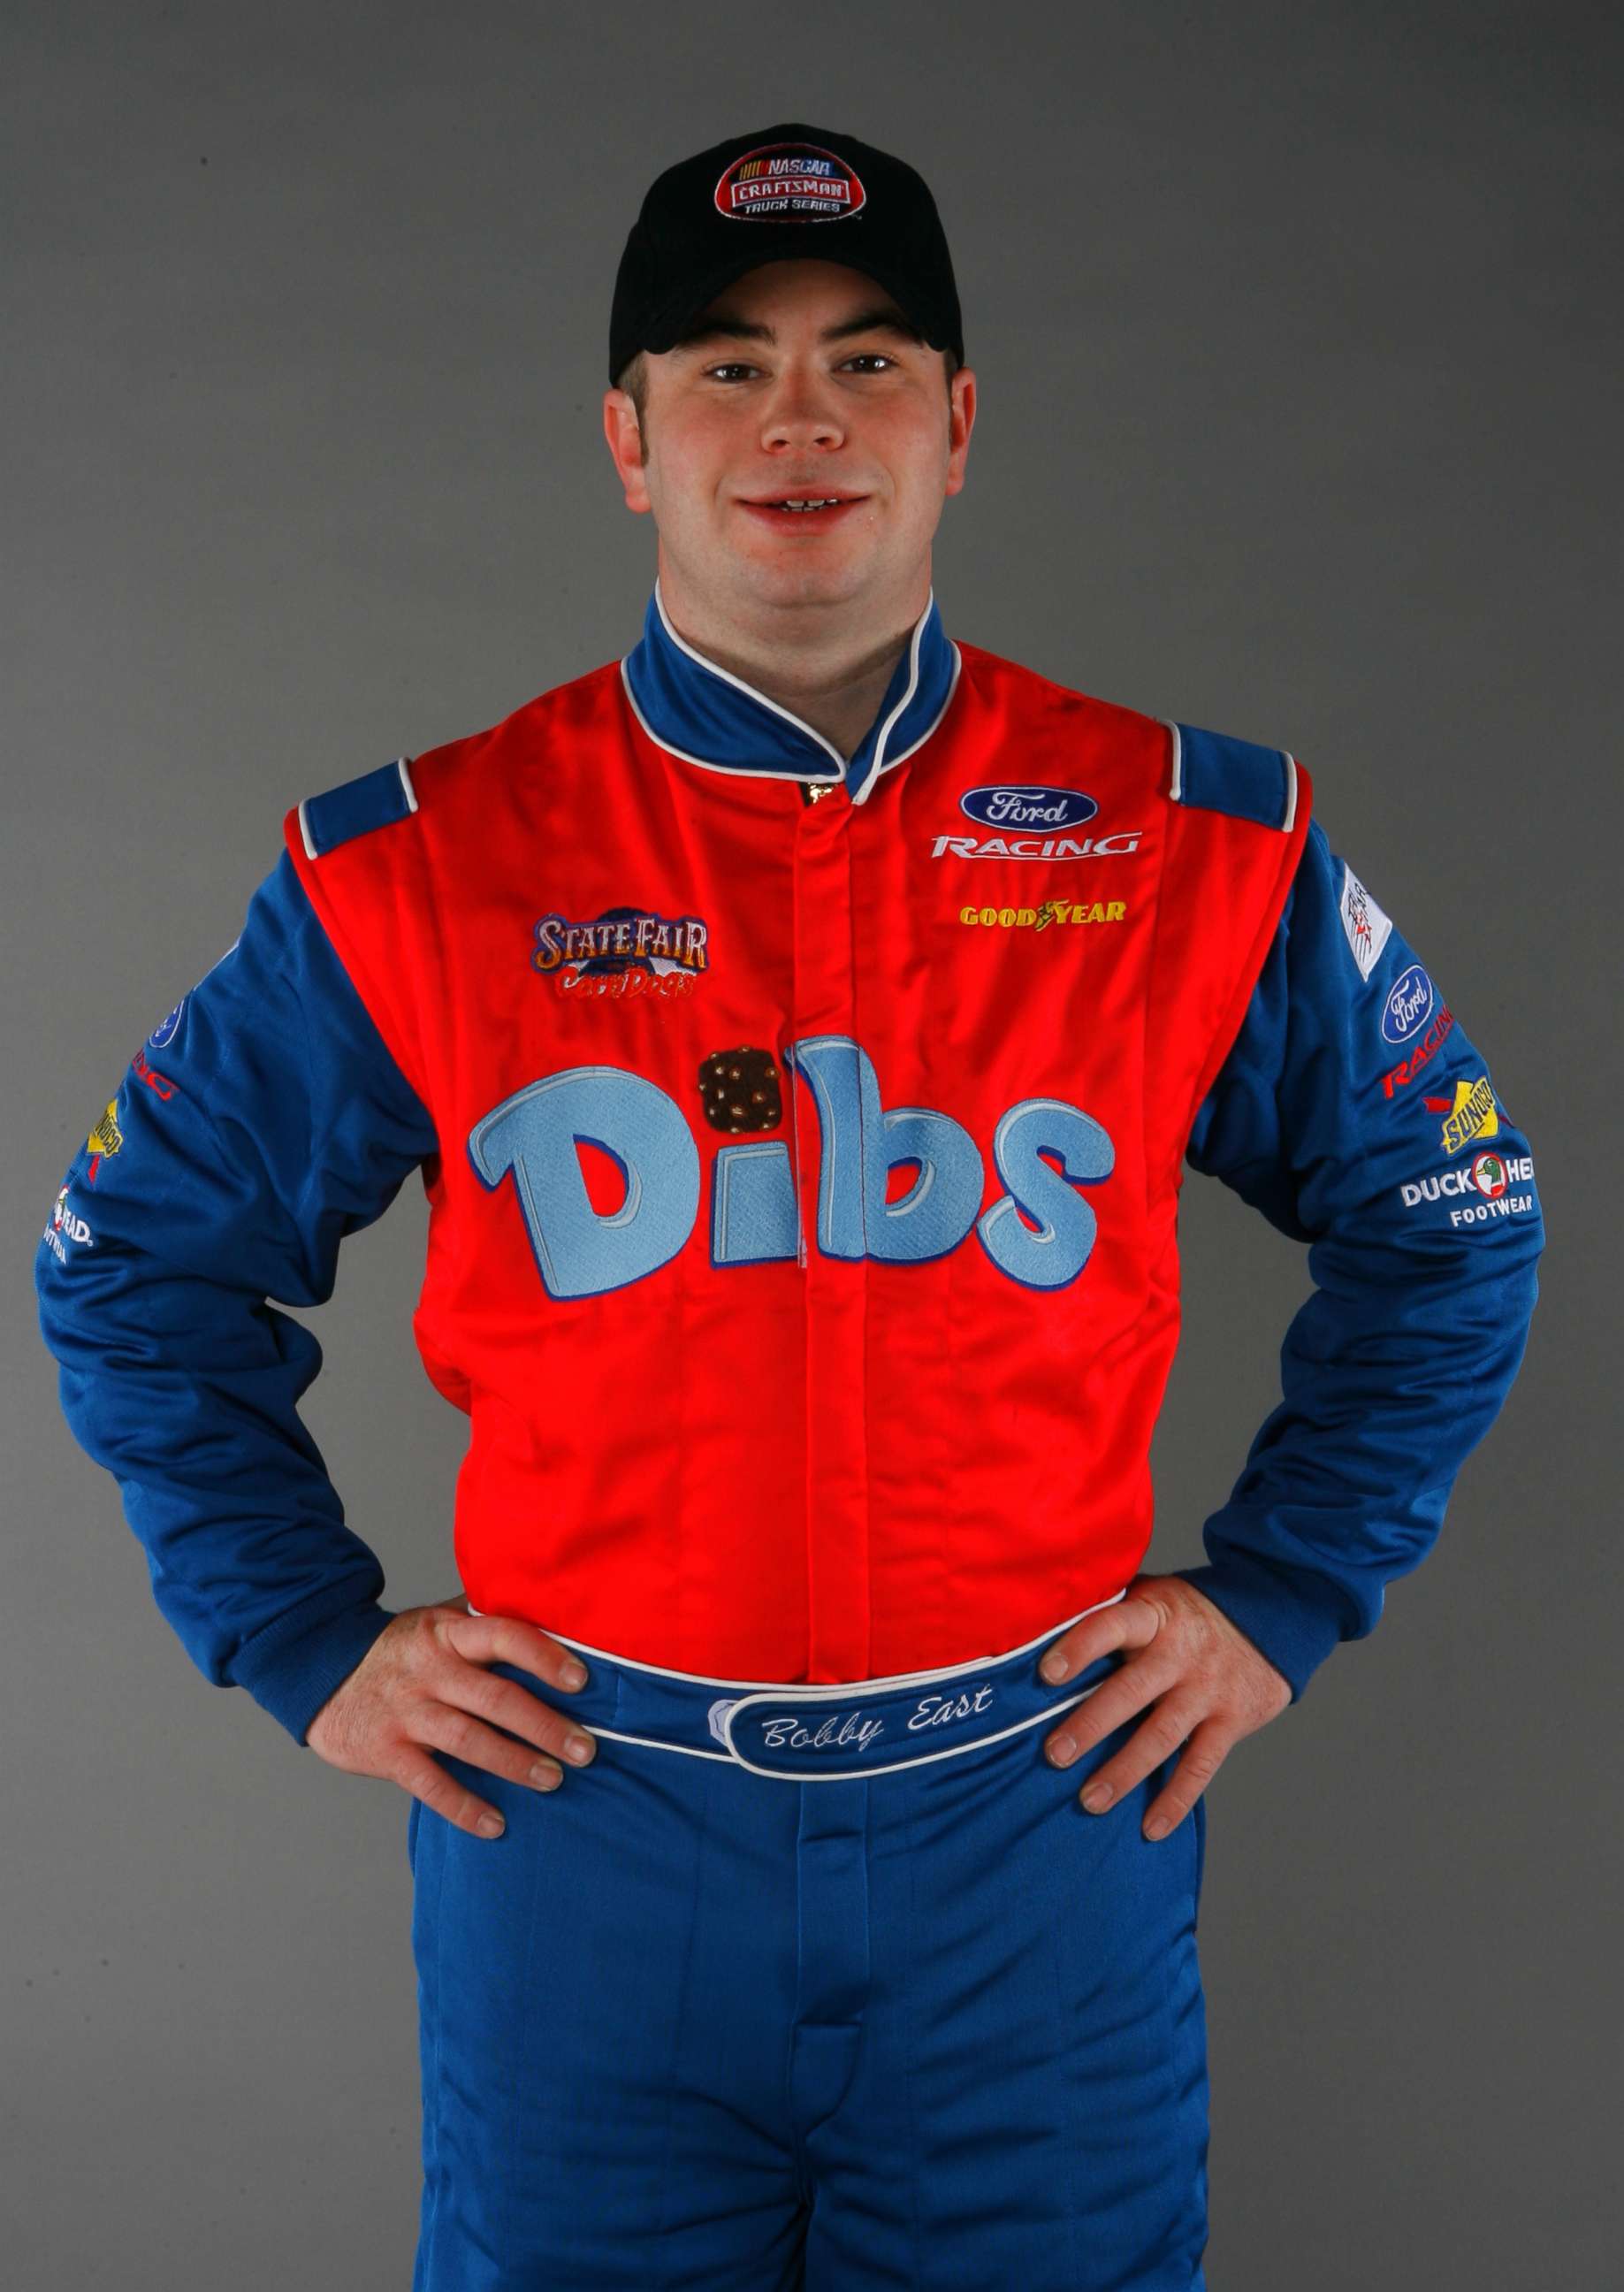 PHOTO: In this Feb 9, 2006 file photo Bobby East, driver of the #21 Ford during the NASCAR Craftsman Truck Series media day at Daytona International Speedway in Daytona, Fla.